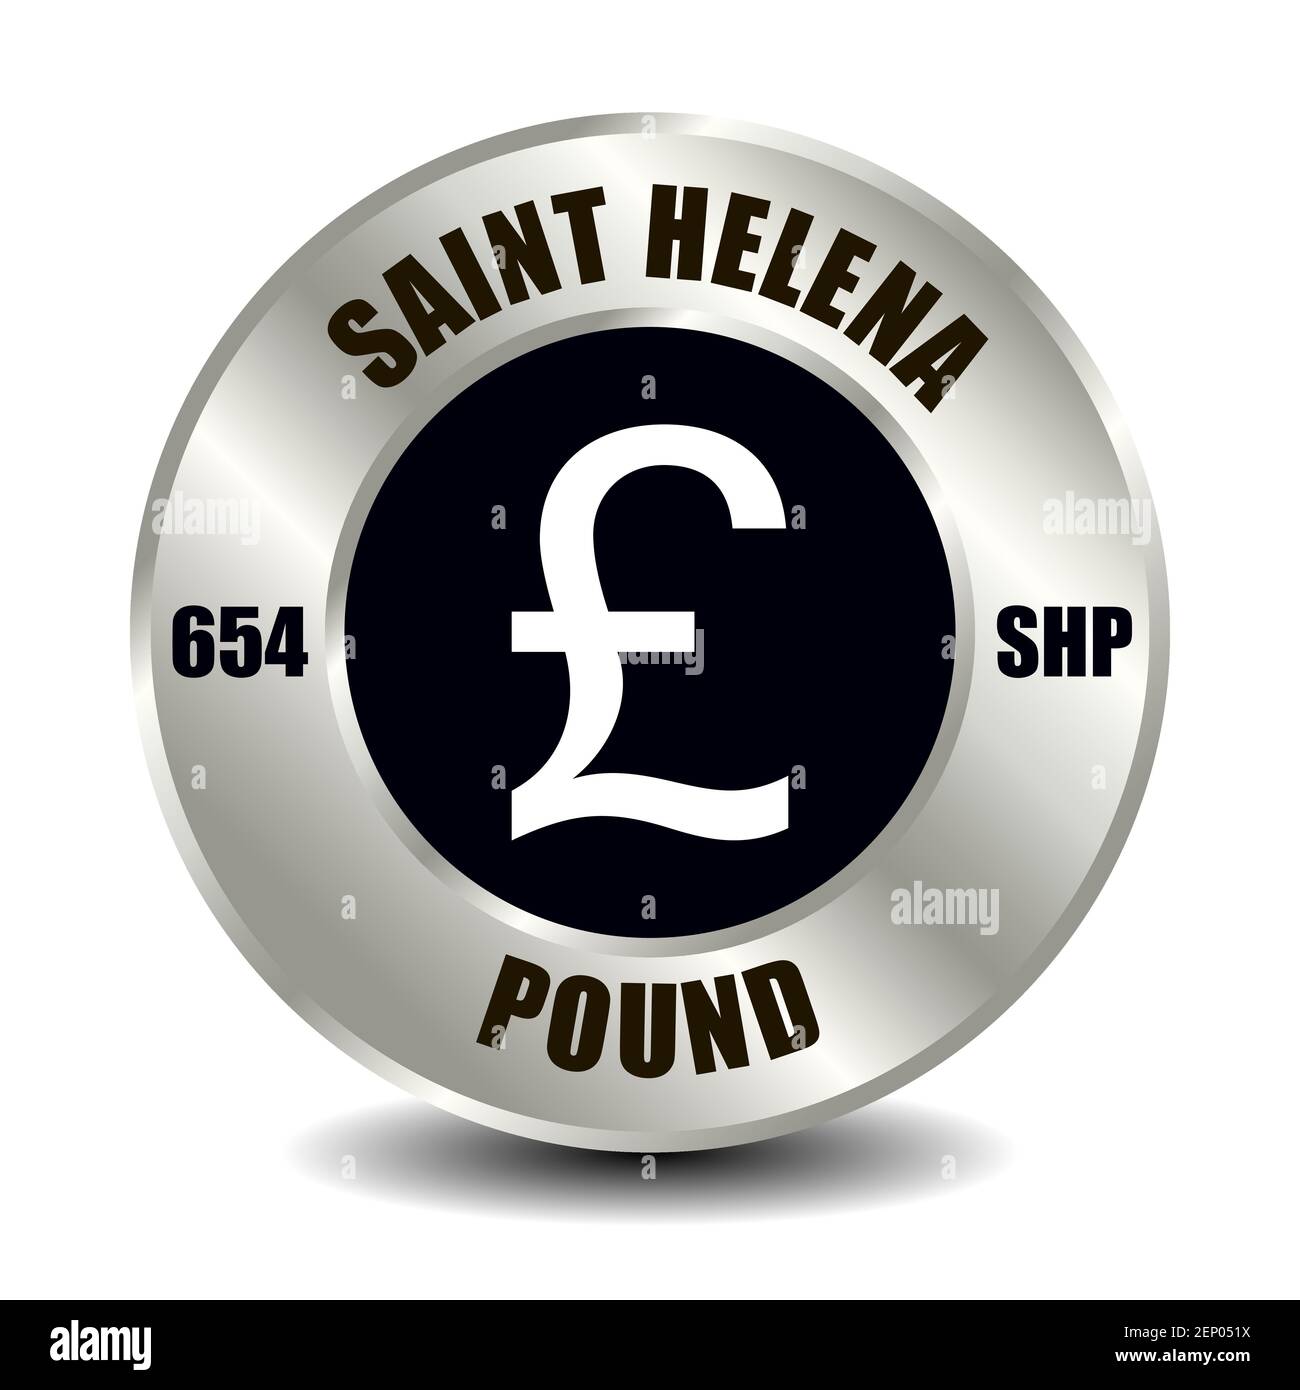 Saint Helena Island money icon isolated on round silver coin. Vector sign of currency symbol with international ISO code and abbreviation Stock Vector